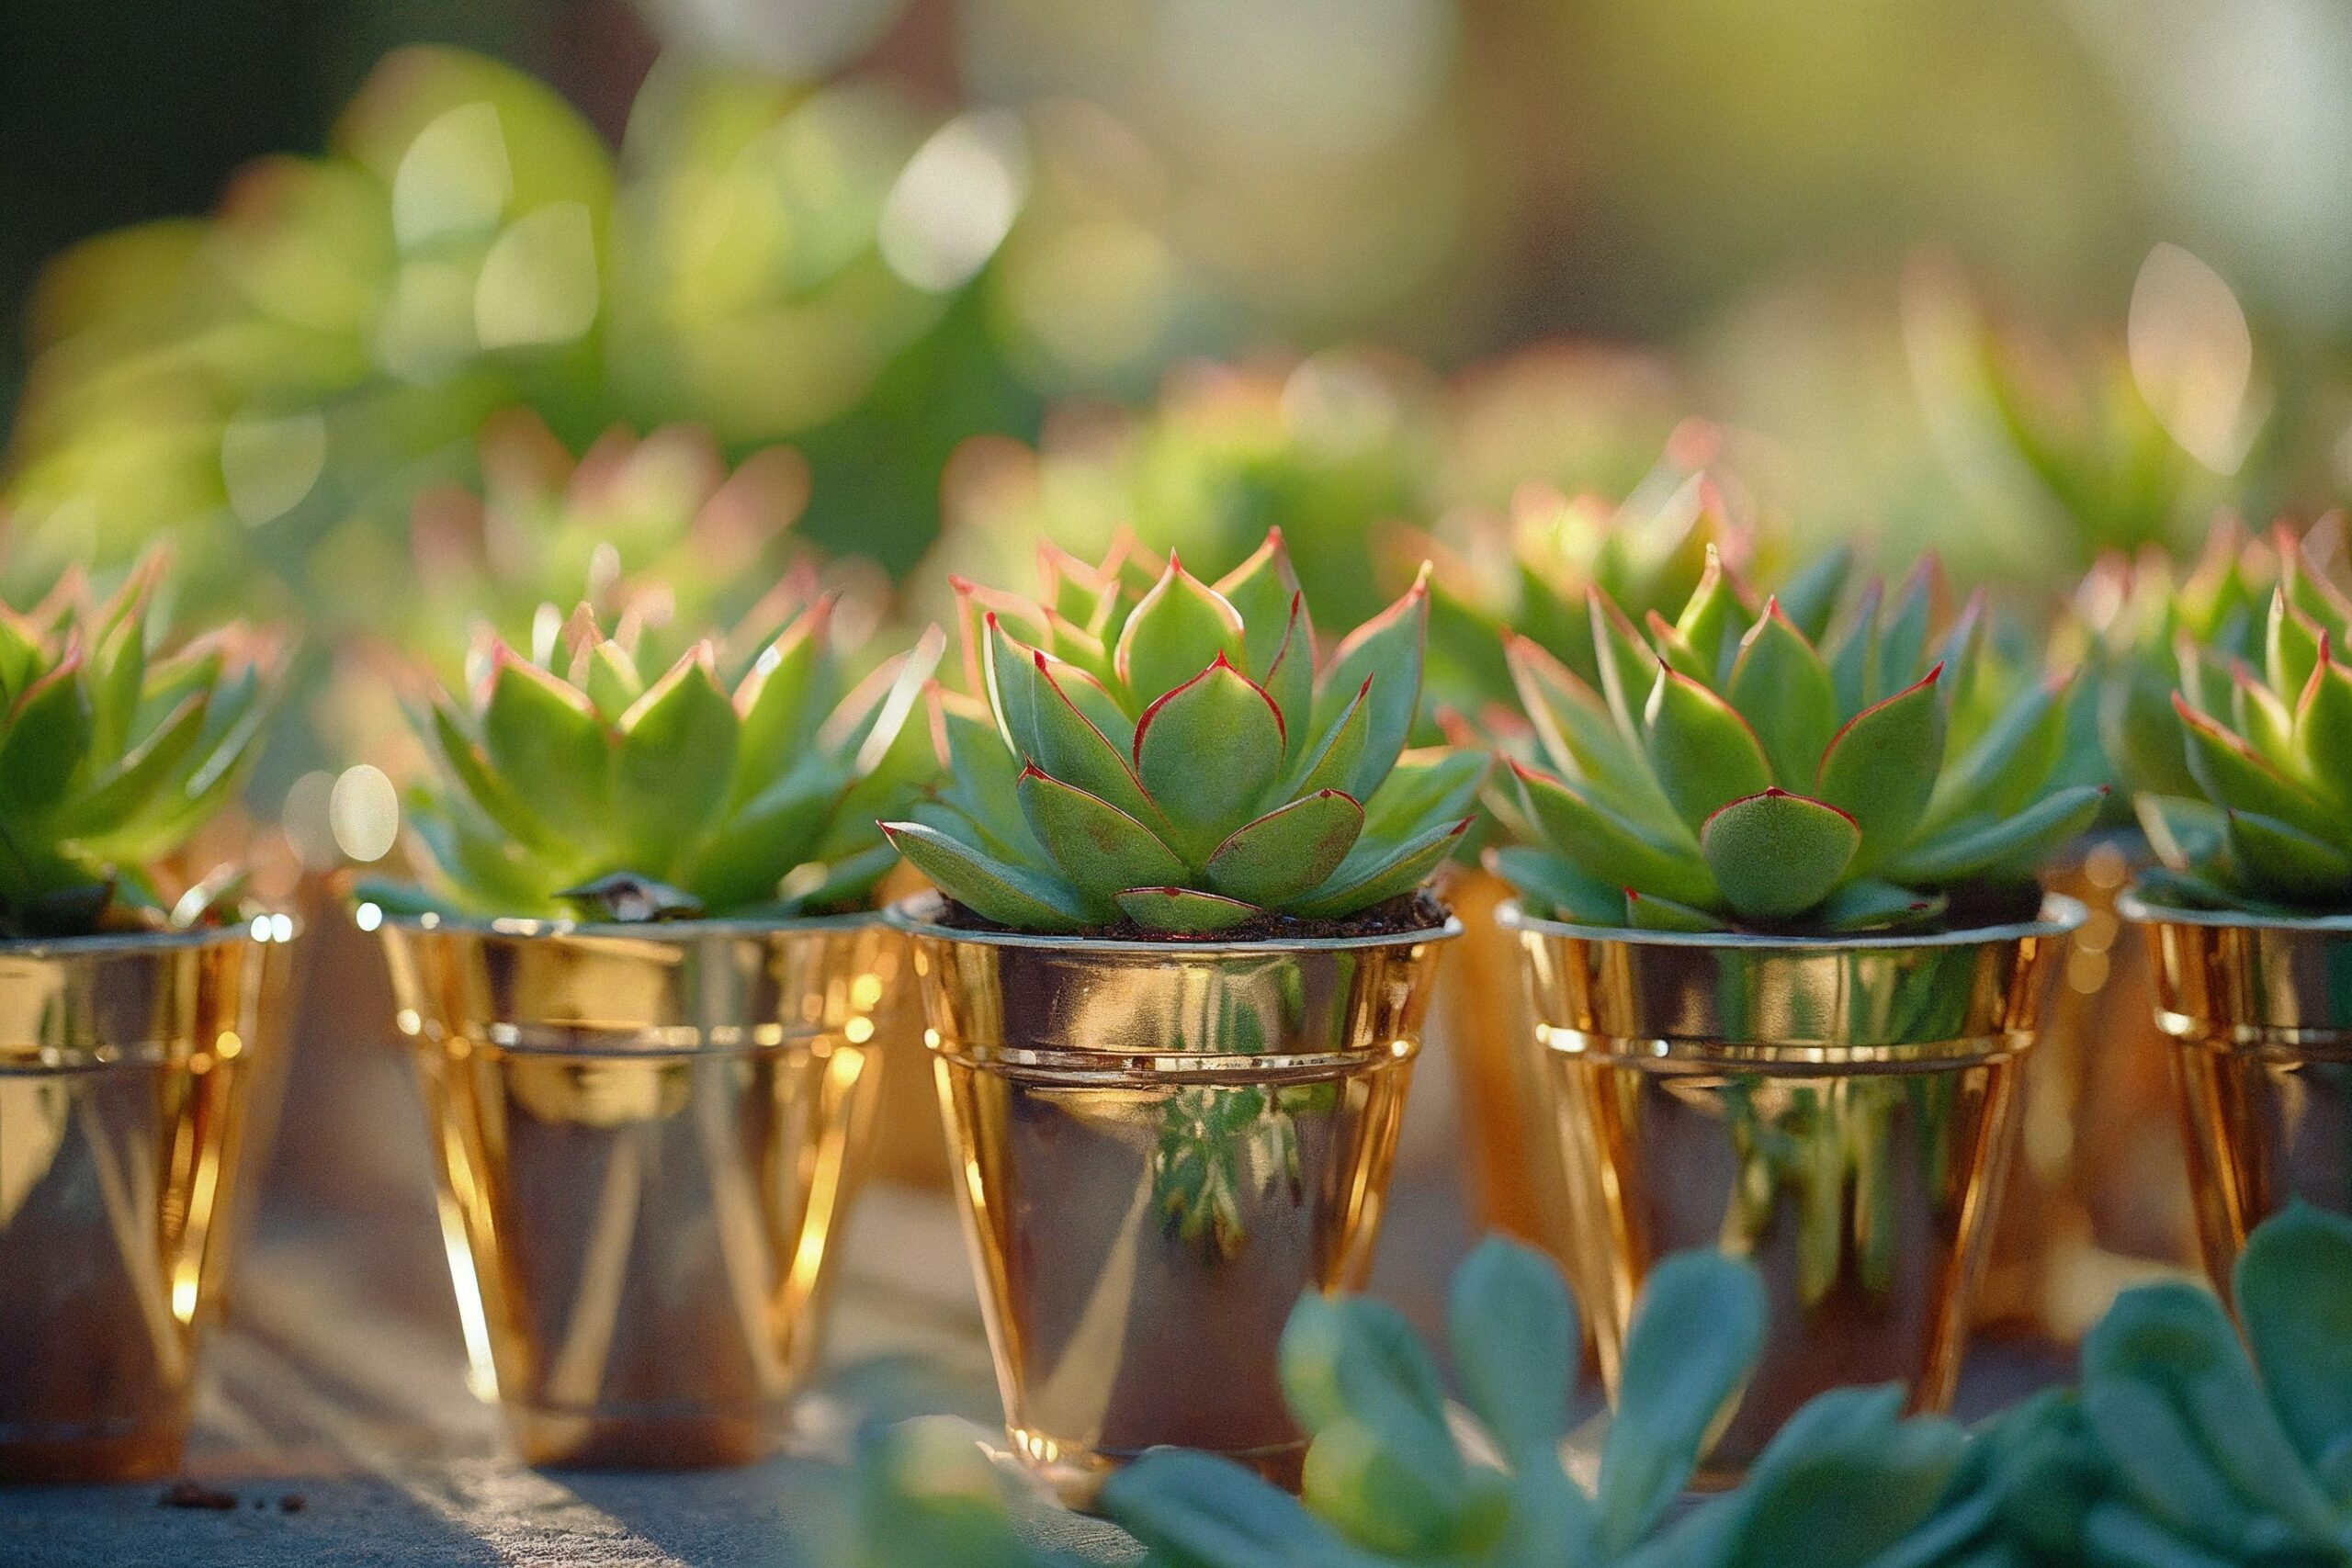 Several small succulent plants in golden pots are arranged closely together on a surface, with a blurred leafy background.